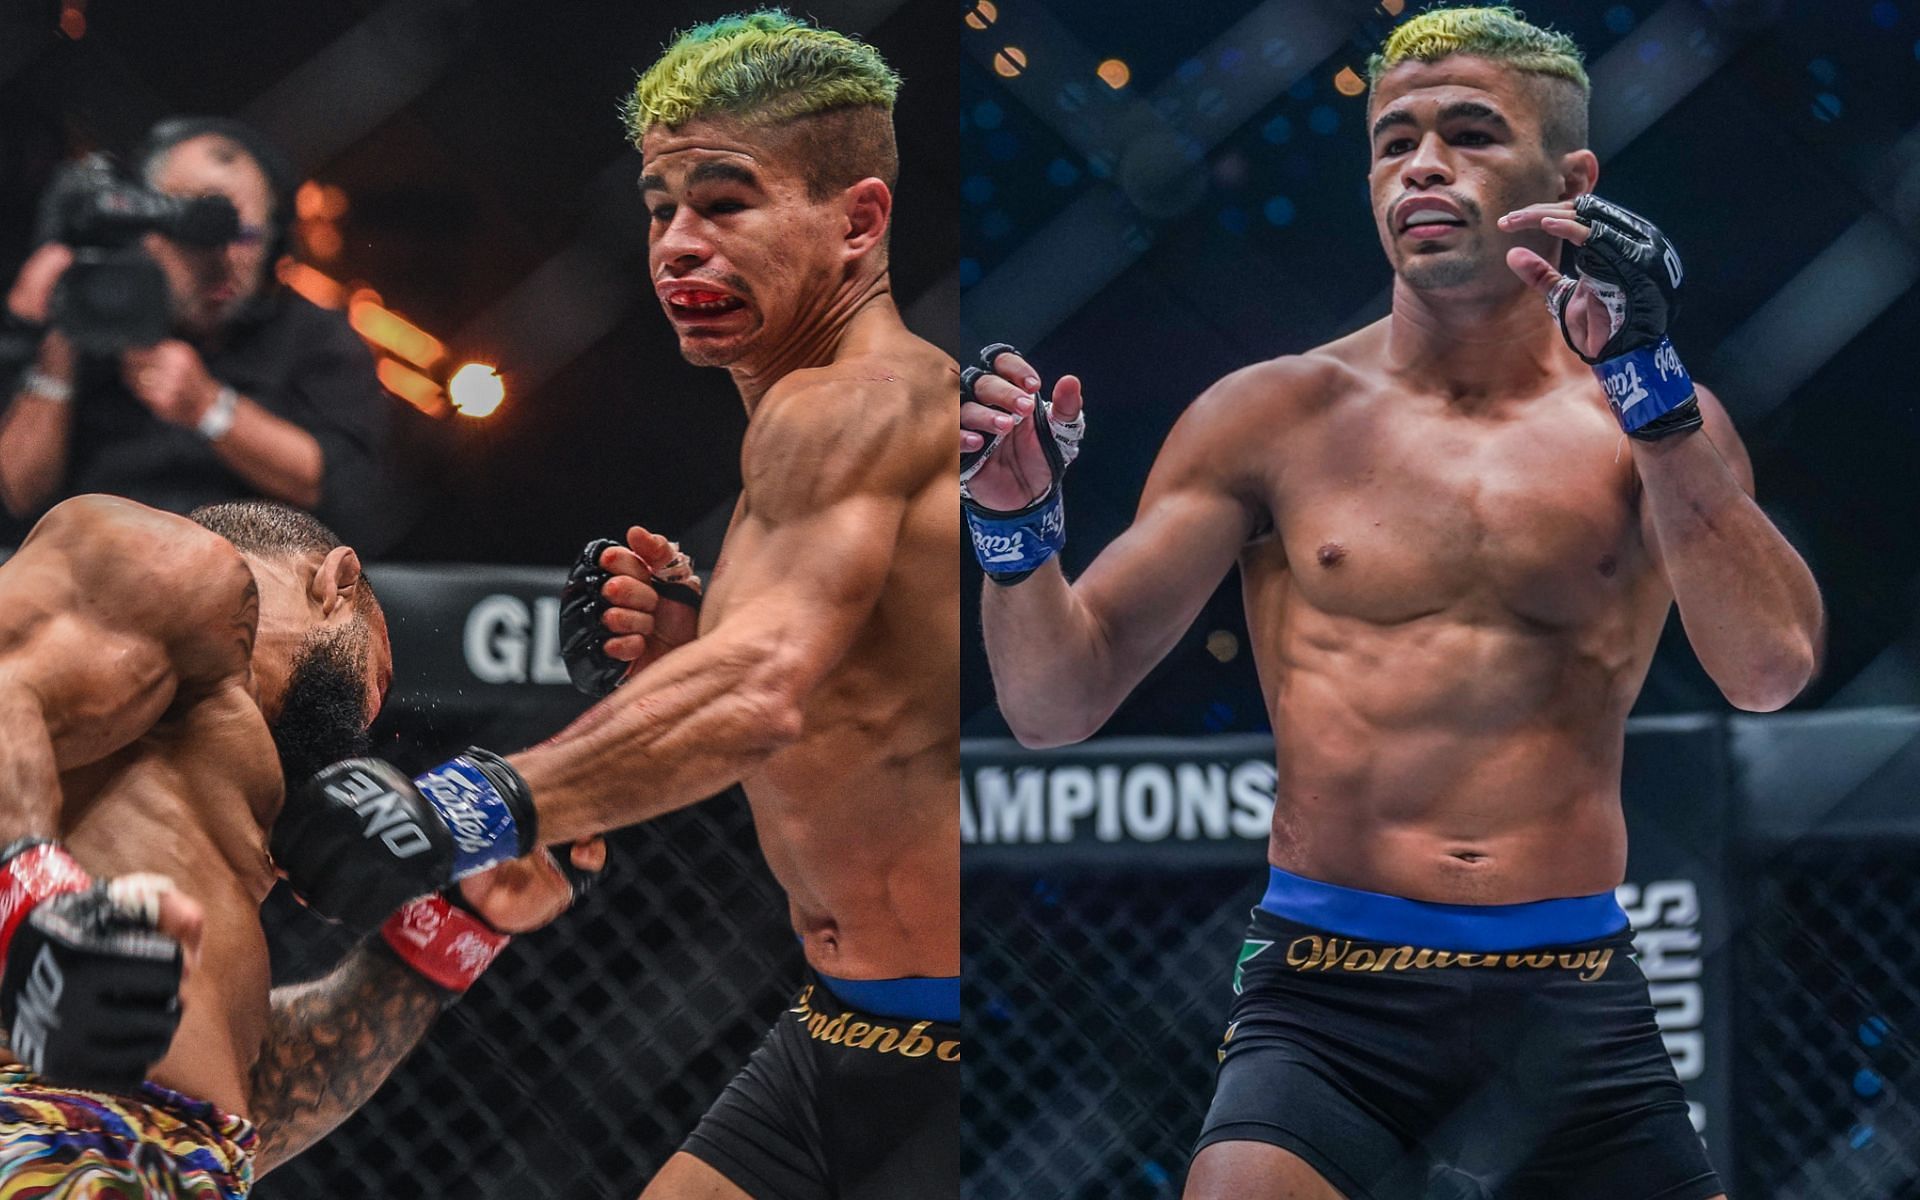 Fabricio Andrade vows to finish John Lineker in a decisive manner if their paths cross again. | Photo by ONE Championship